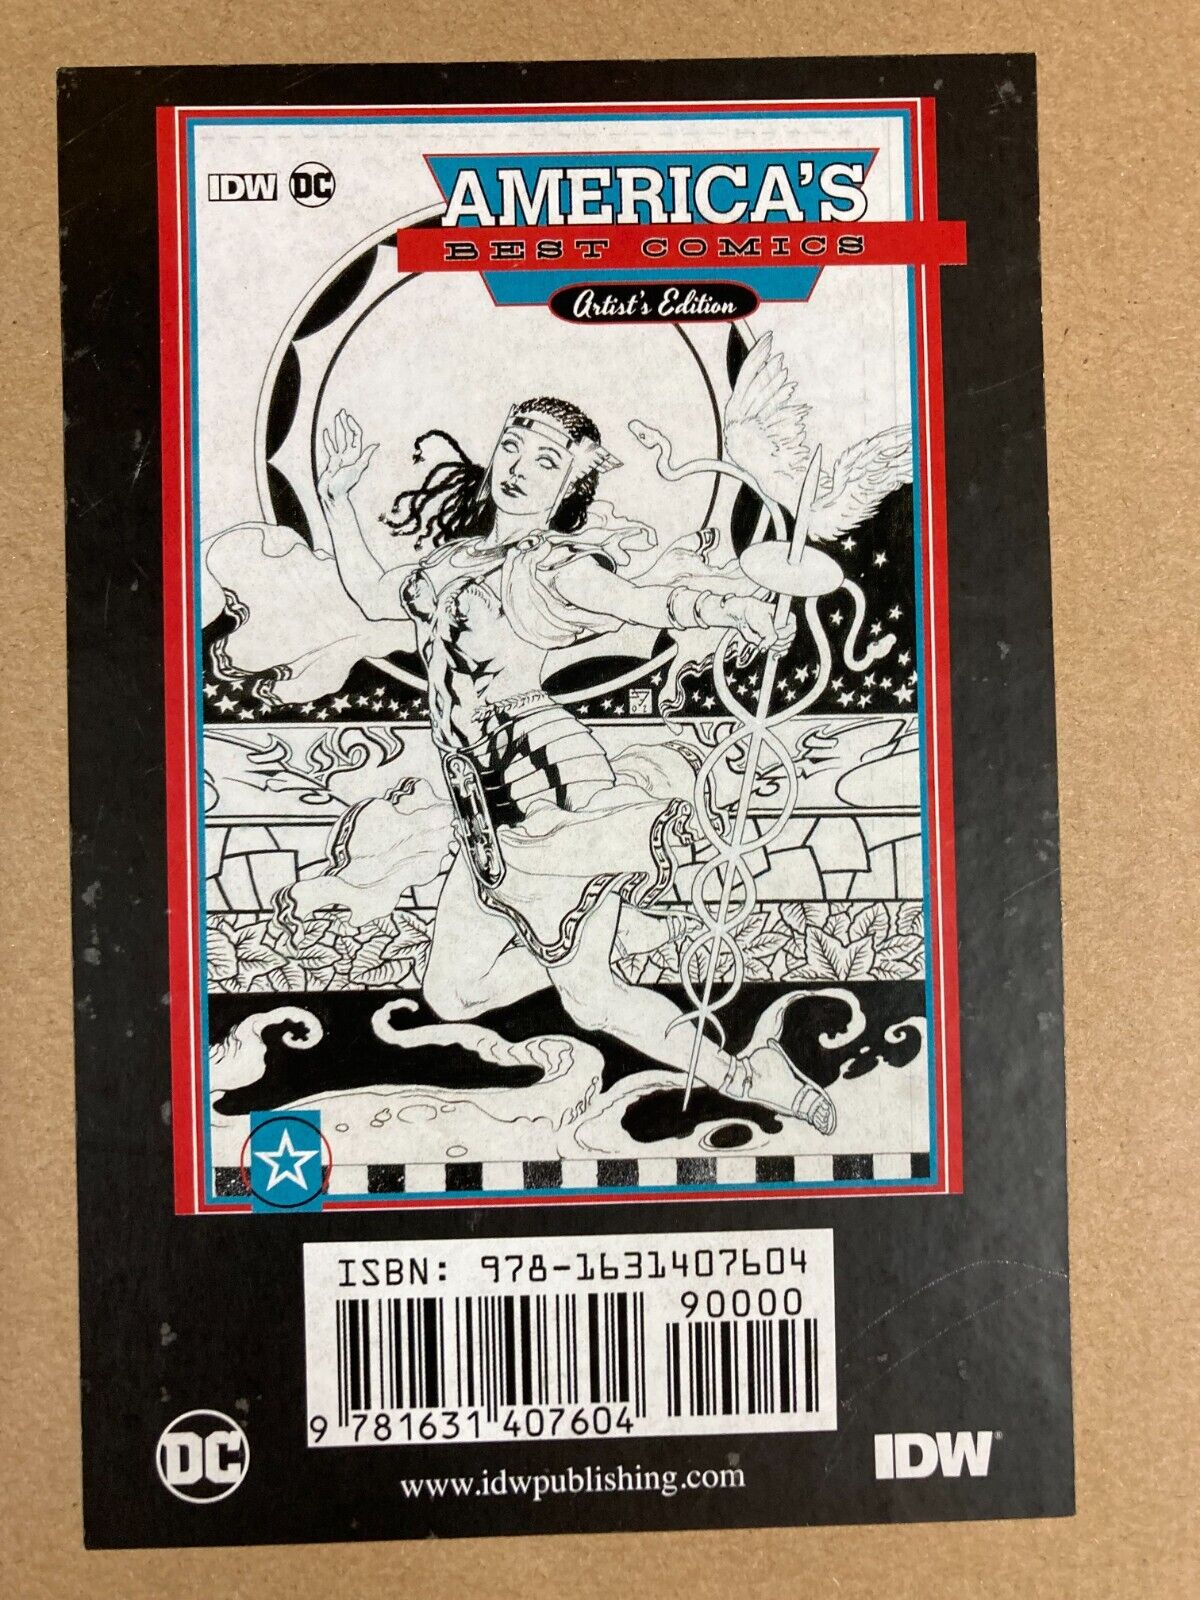 AMERICA'S BEST COMICS ARTIST'S EDITION HC IDW TOM STRONG SPROUSE COVER New